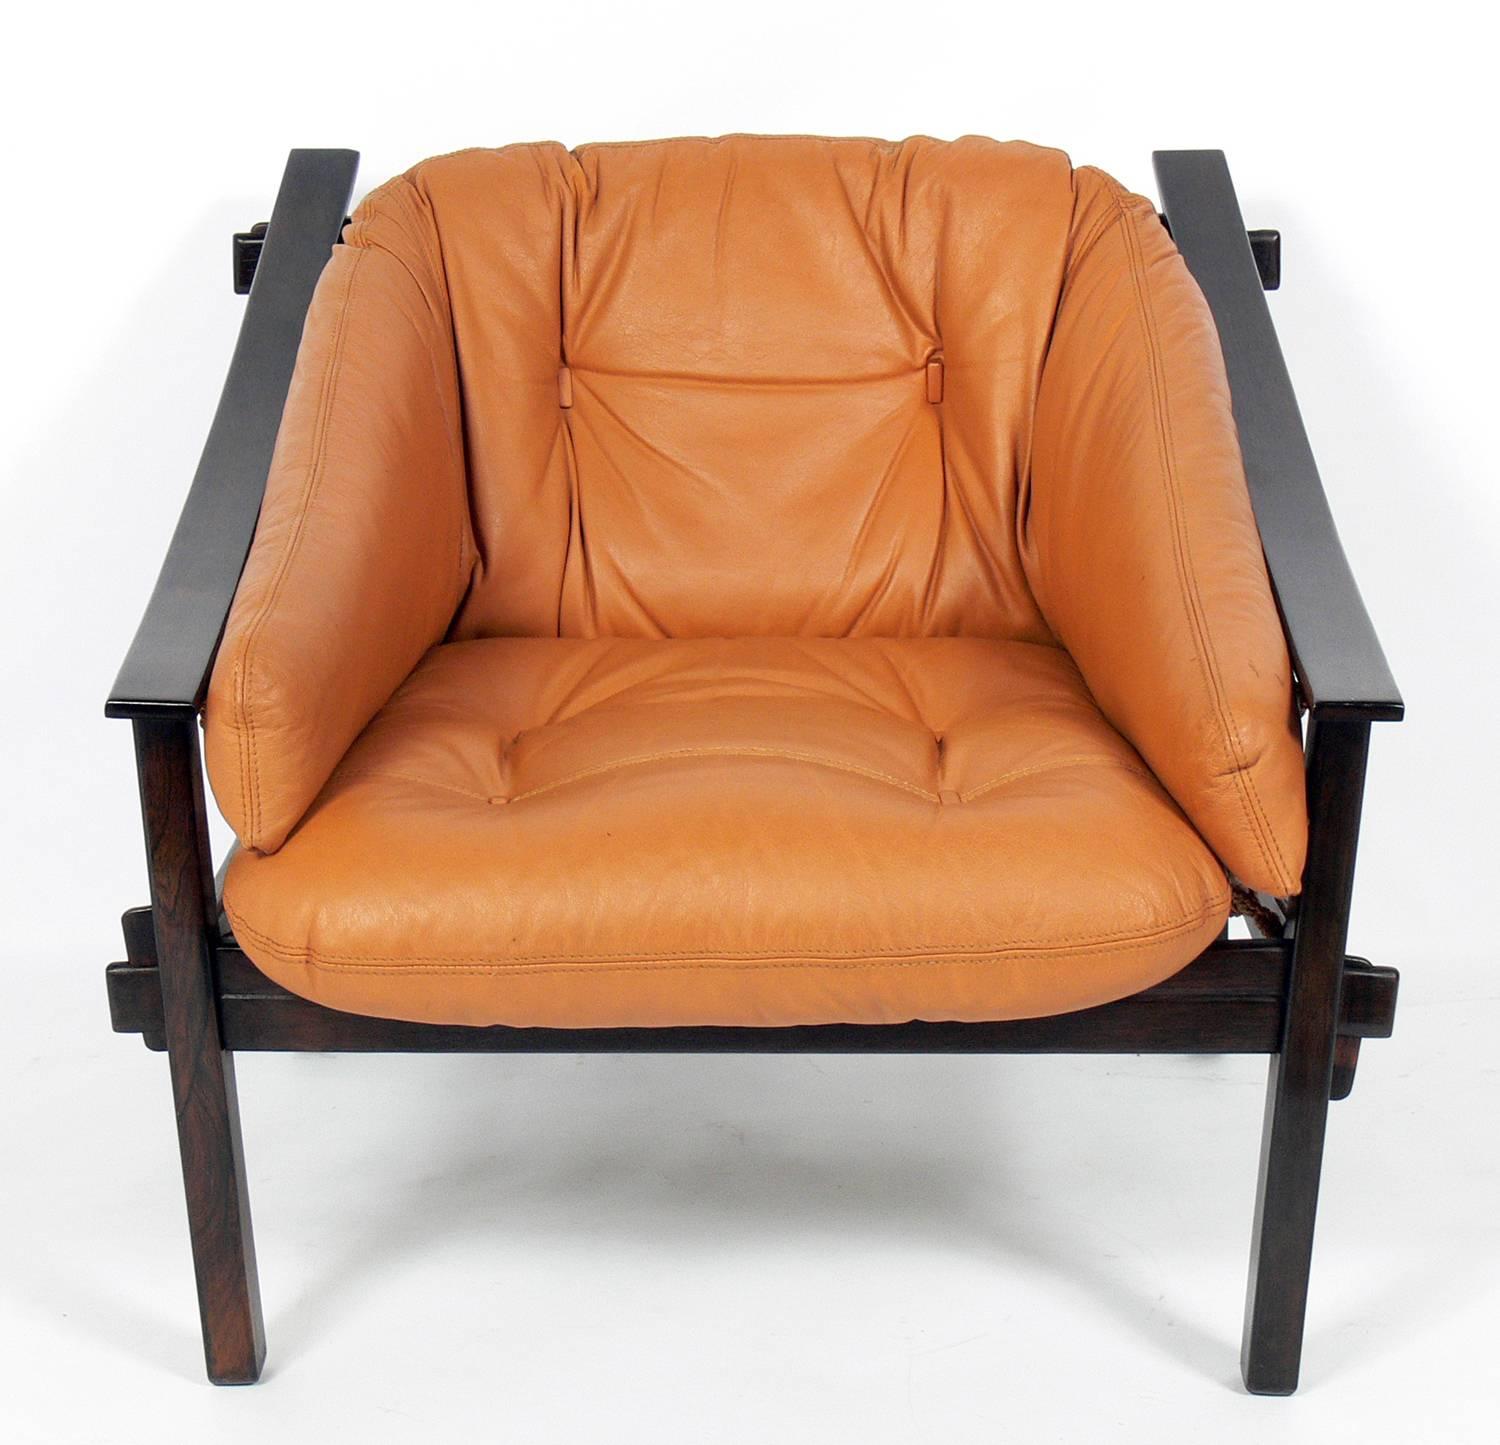 Exotic Jacaranda and leather Brazilian lounge chair, designed by Jean Gillon for Italma Wood Art, Brazil, circa 1960s. It retains its original leather upholstery, which is perfectly worn and broken in if you like aged leather. If you prefer, we can